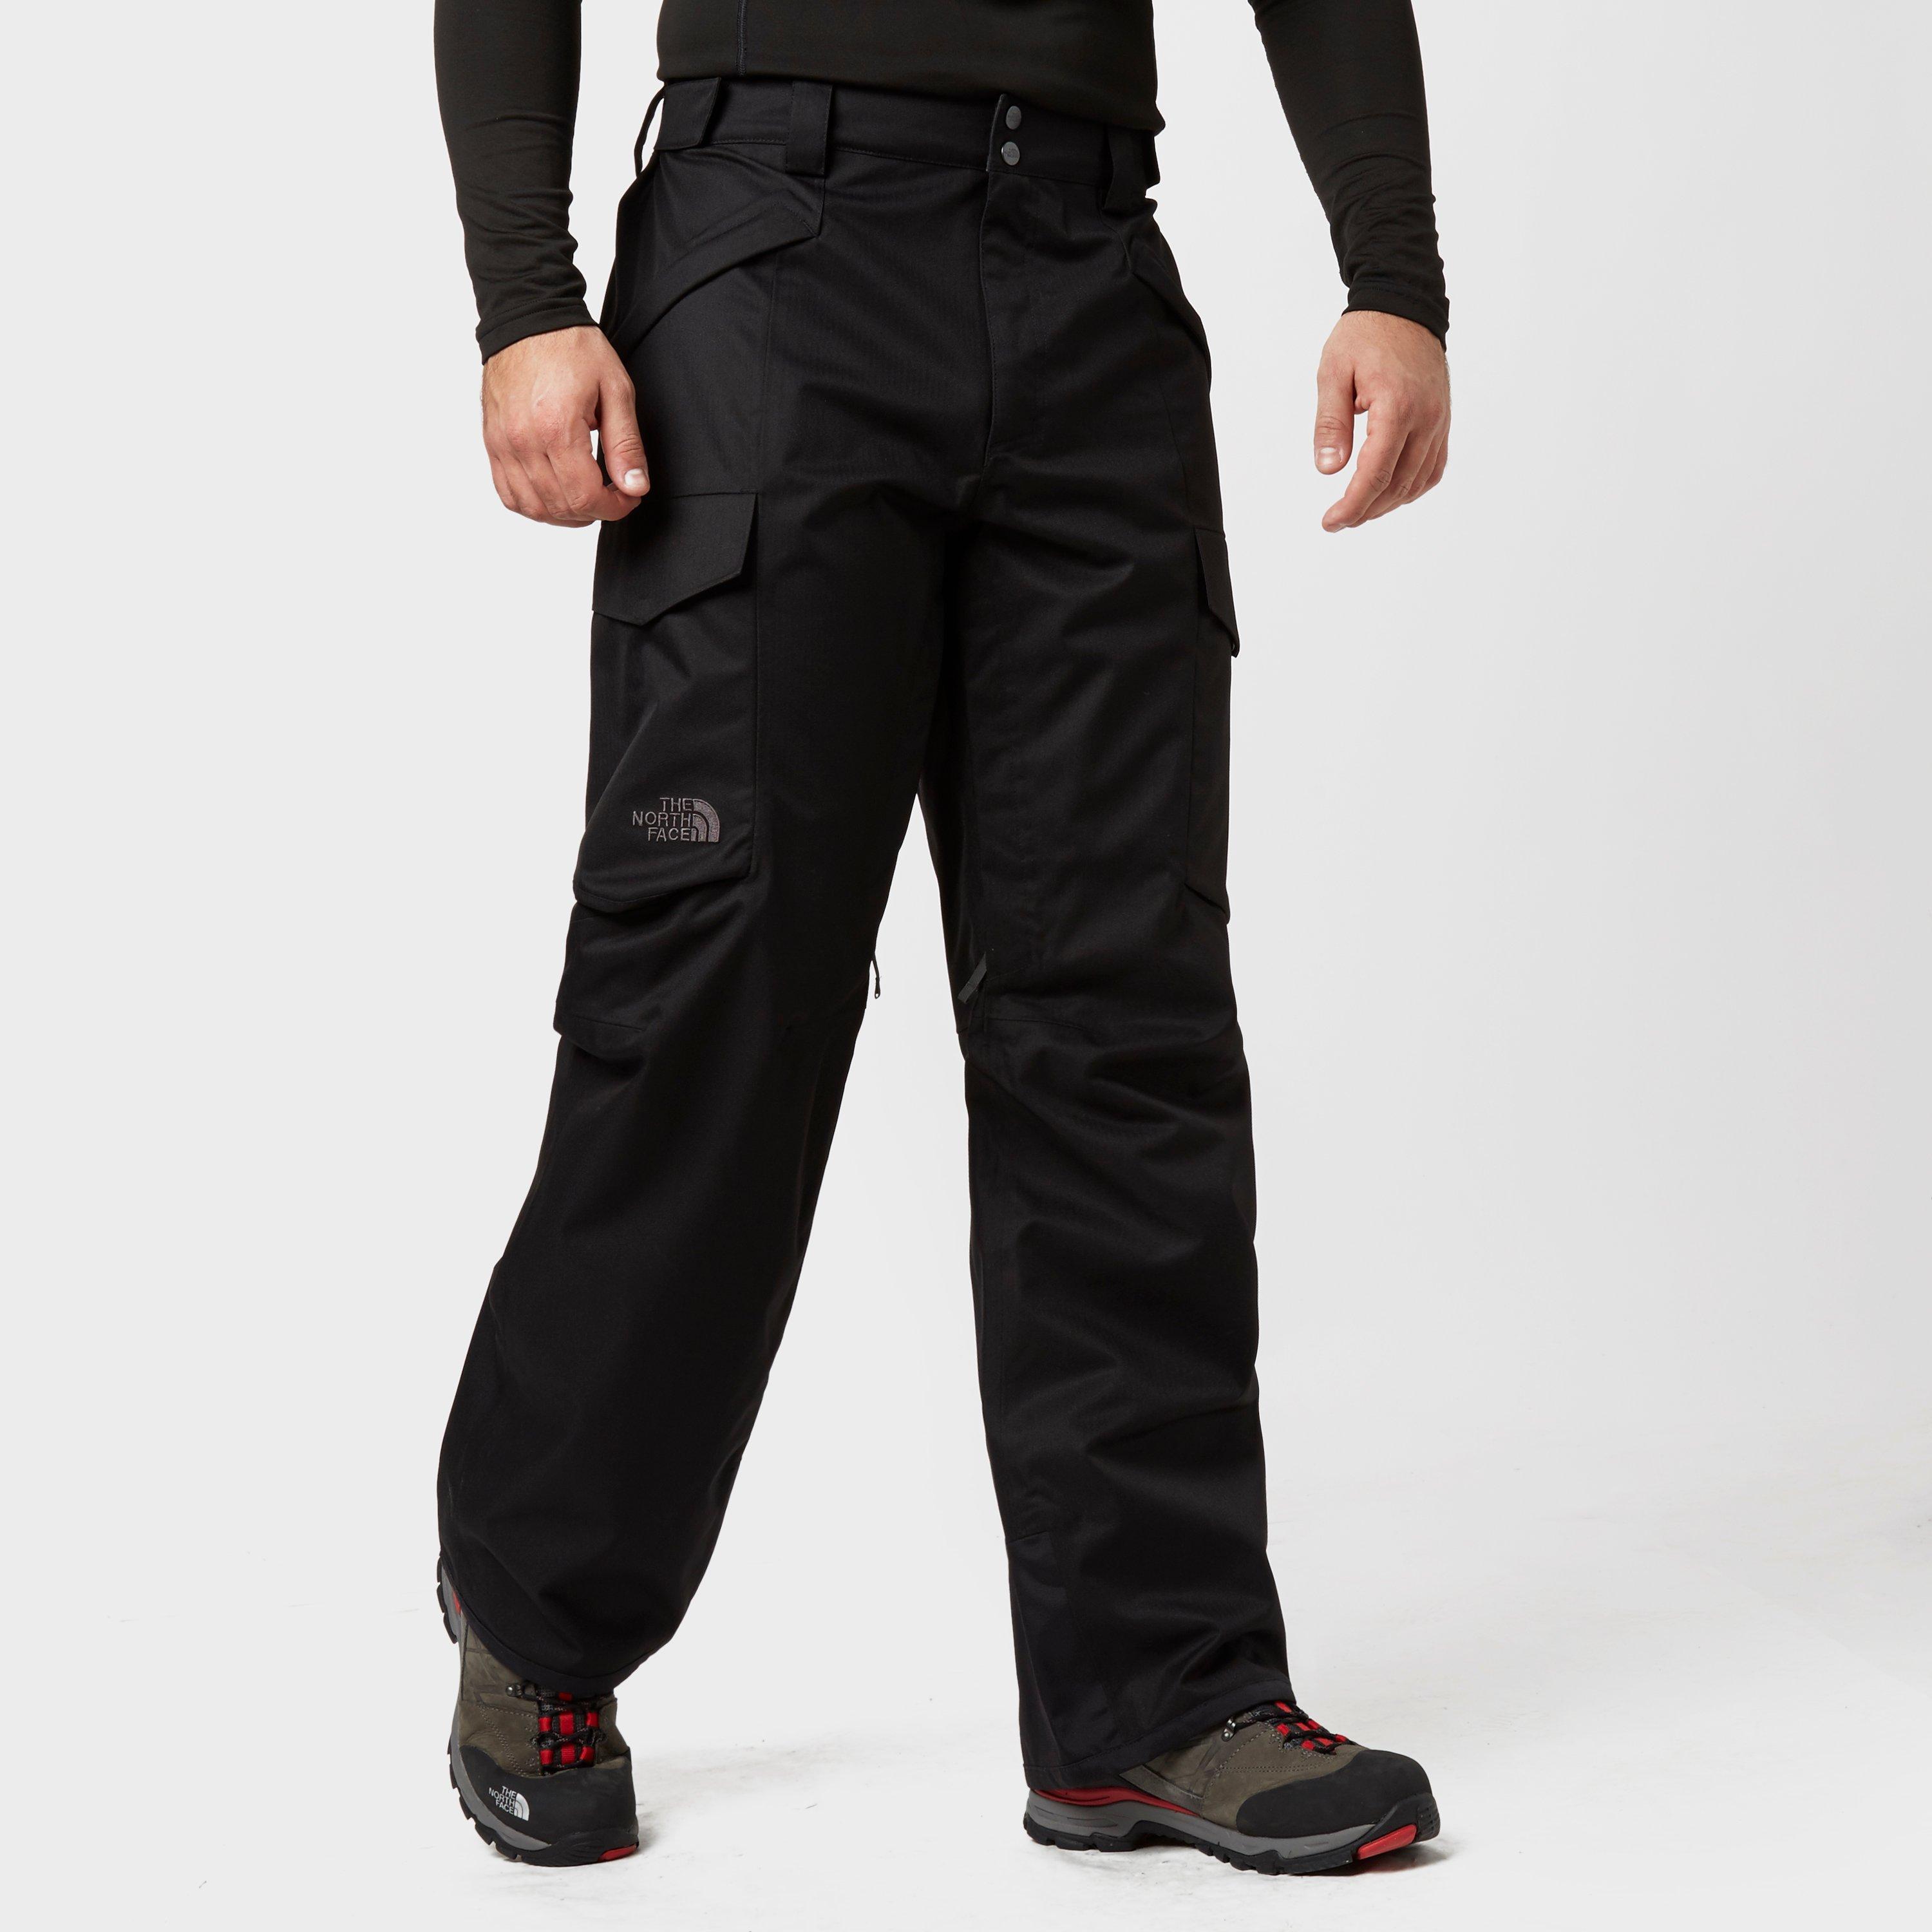 The North Face Men's Gatekeeper Trousers